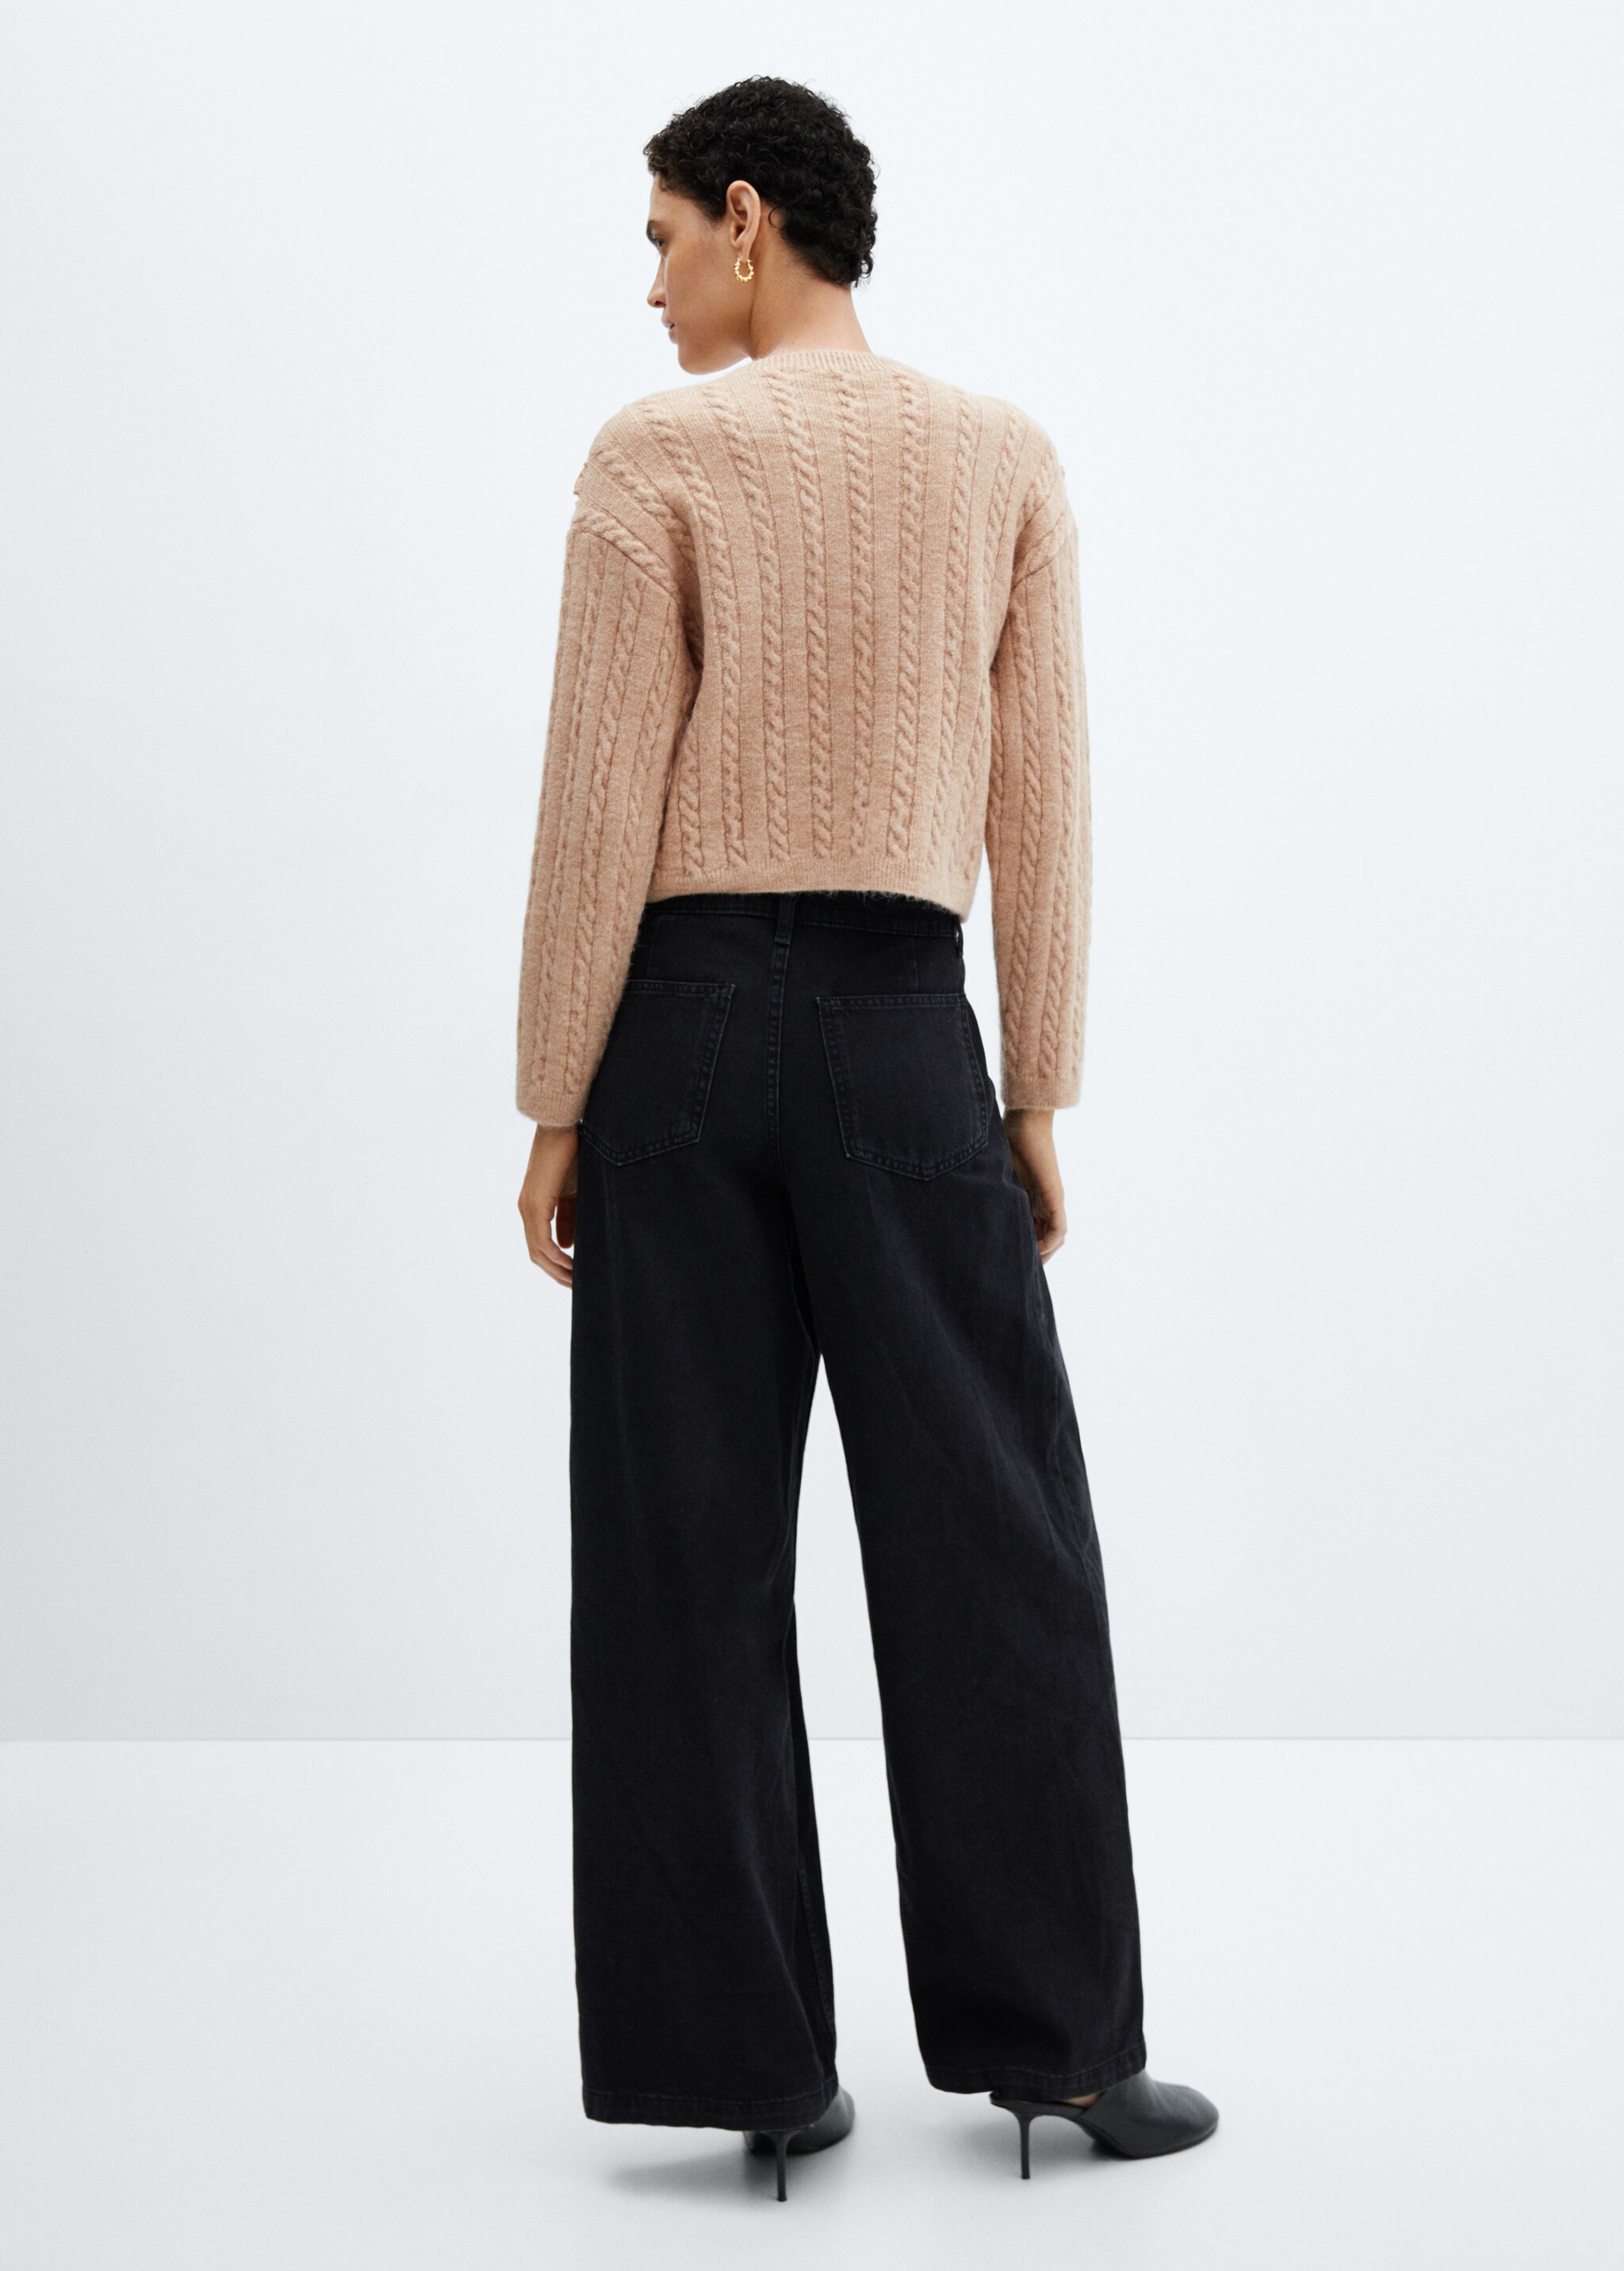 Ruffled crop sweater - Reverse of the article